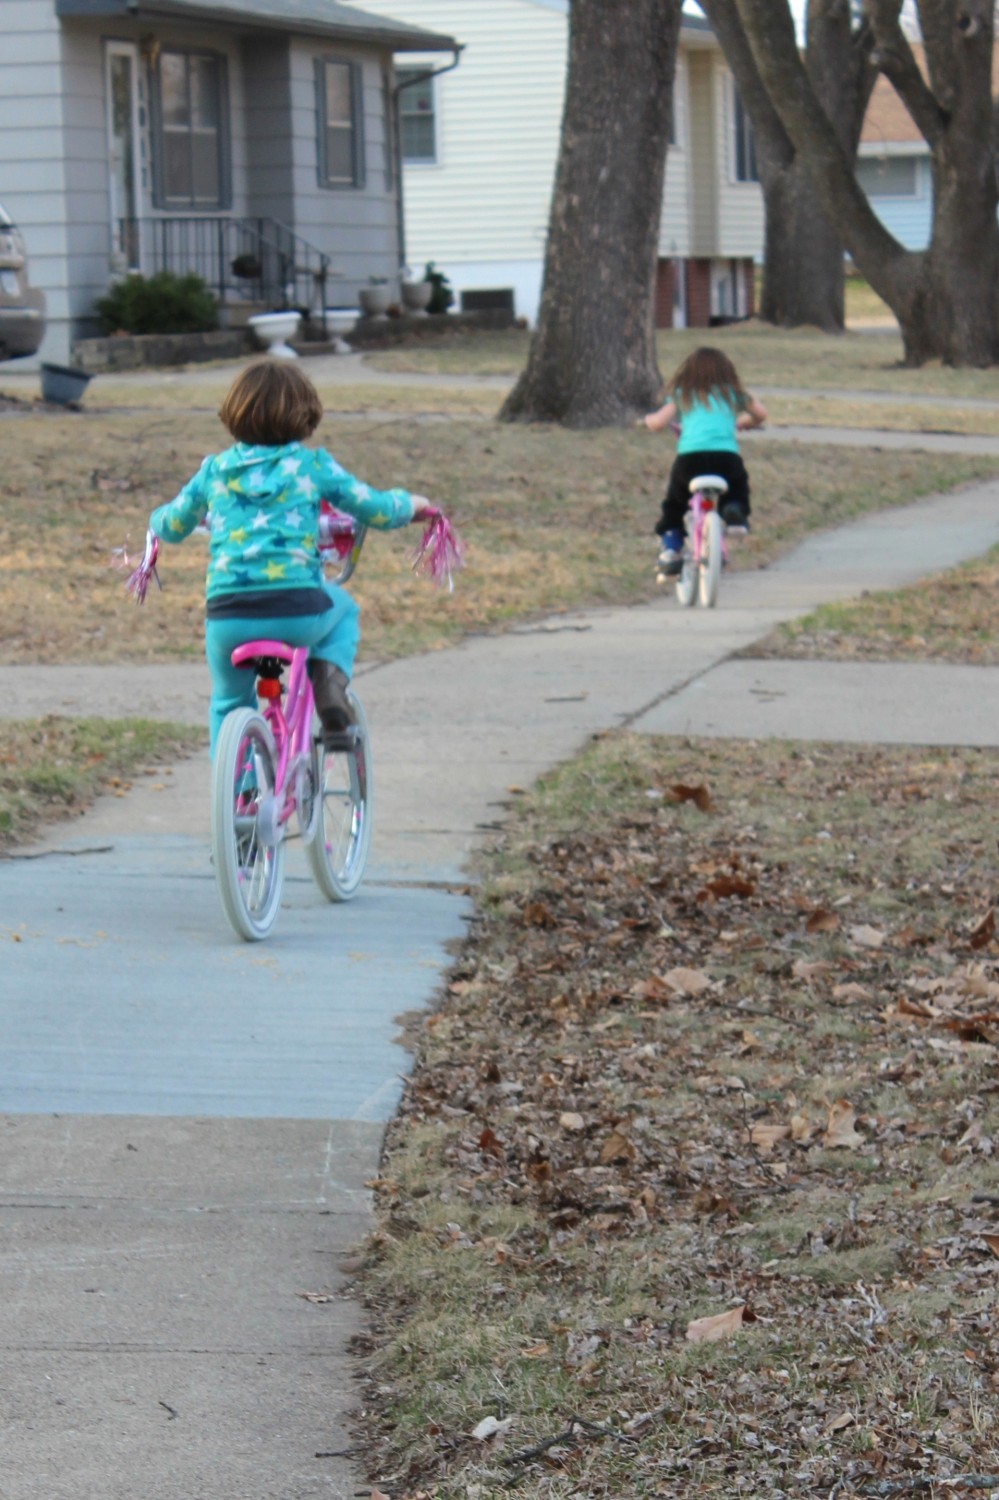 My little girls riding their bikes in the neighborhood last year: June was 6 and Rory was 4. 